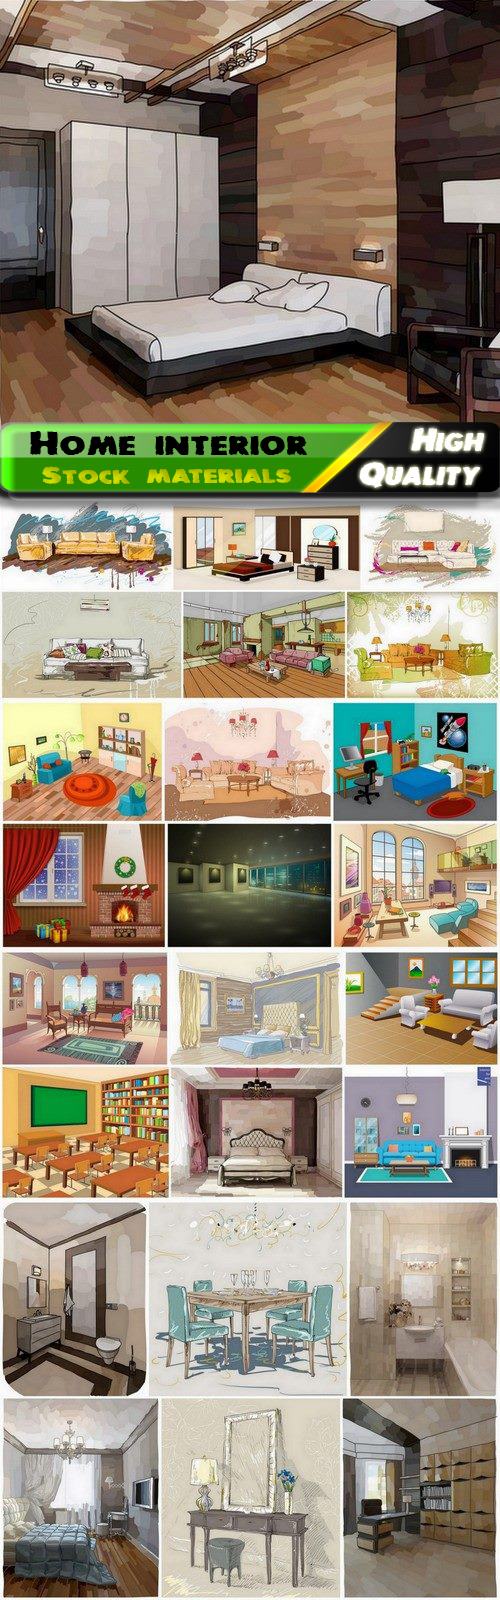 Sketches and illustrations of home interior - 25 Eps